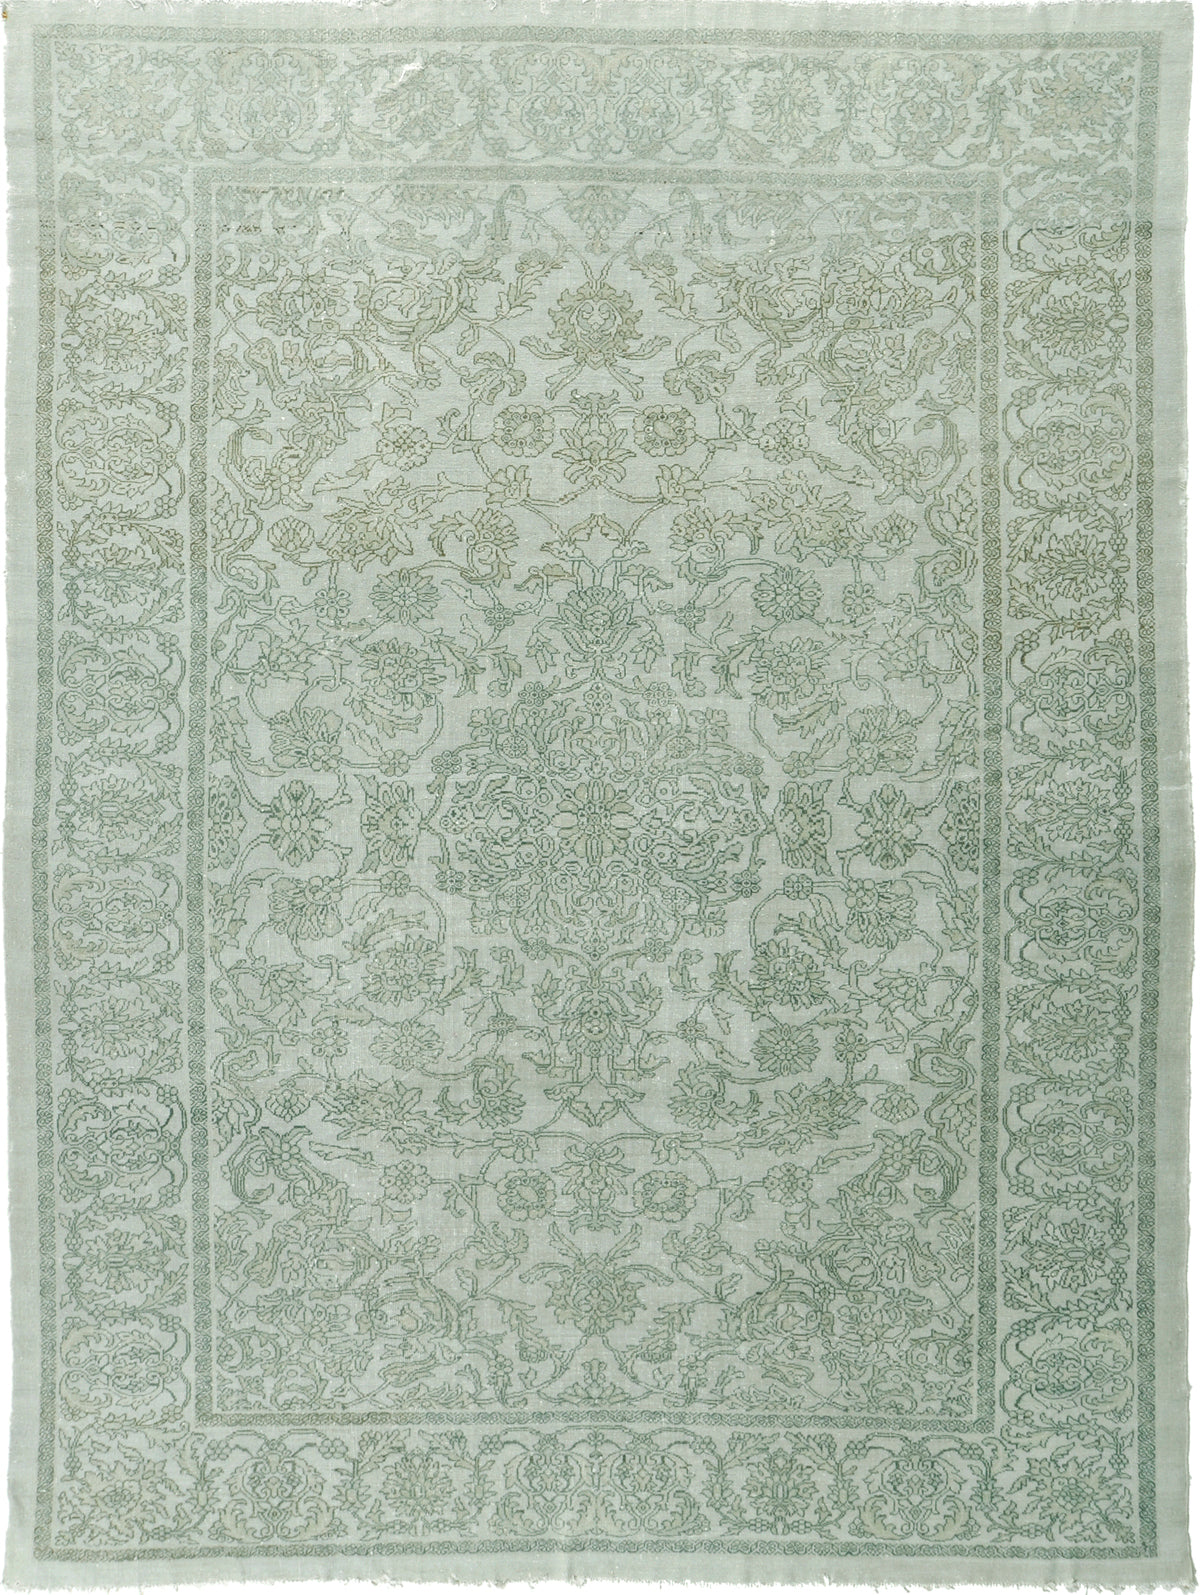 Antique Persian Sultanabad Rug 56658